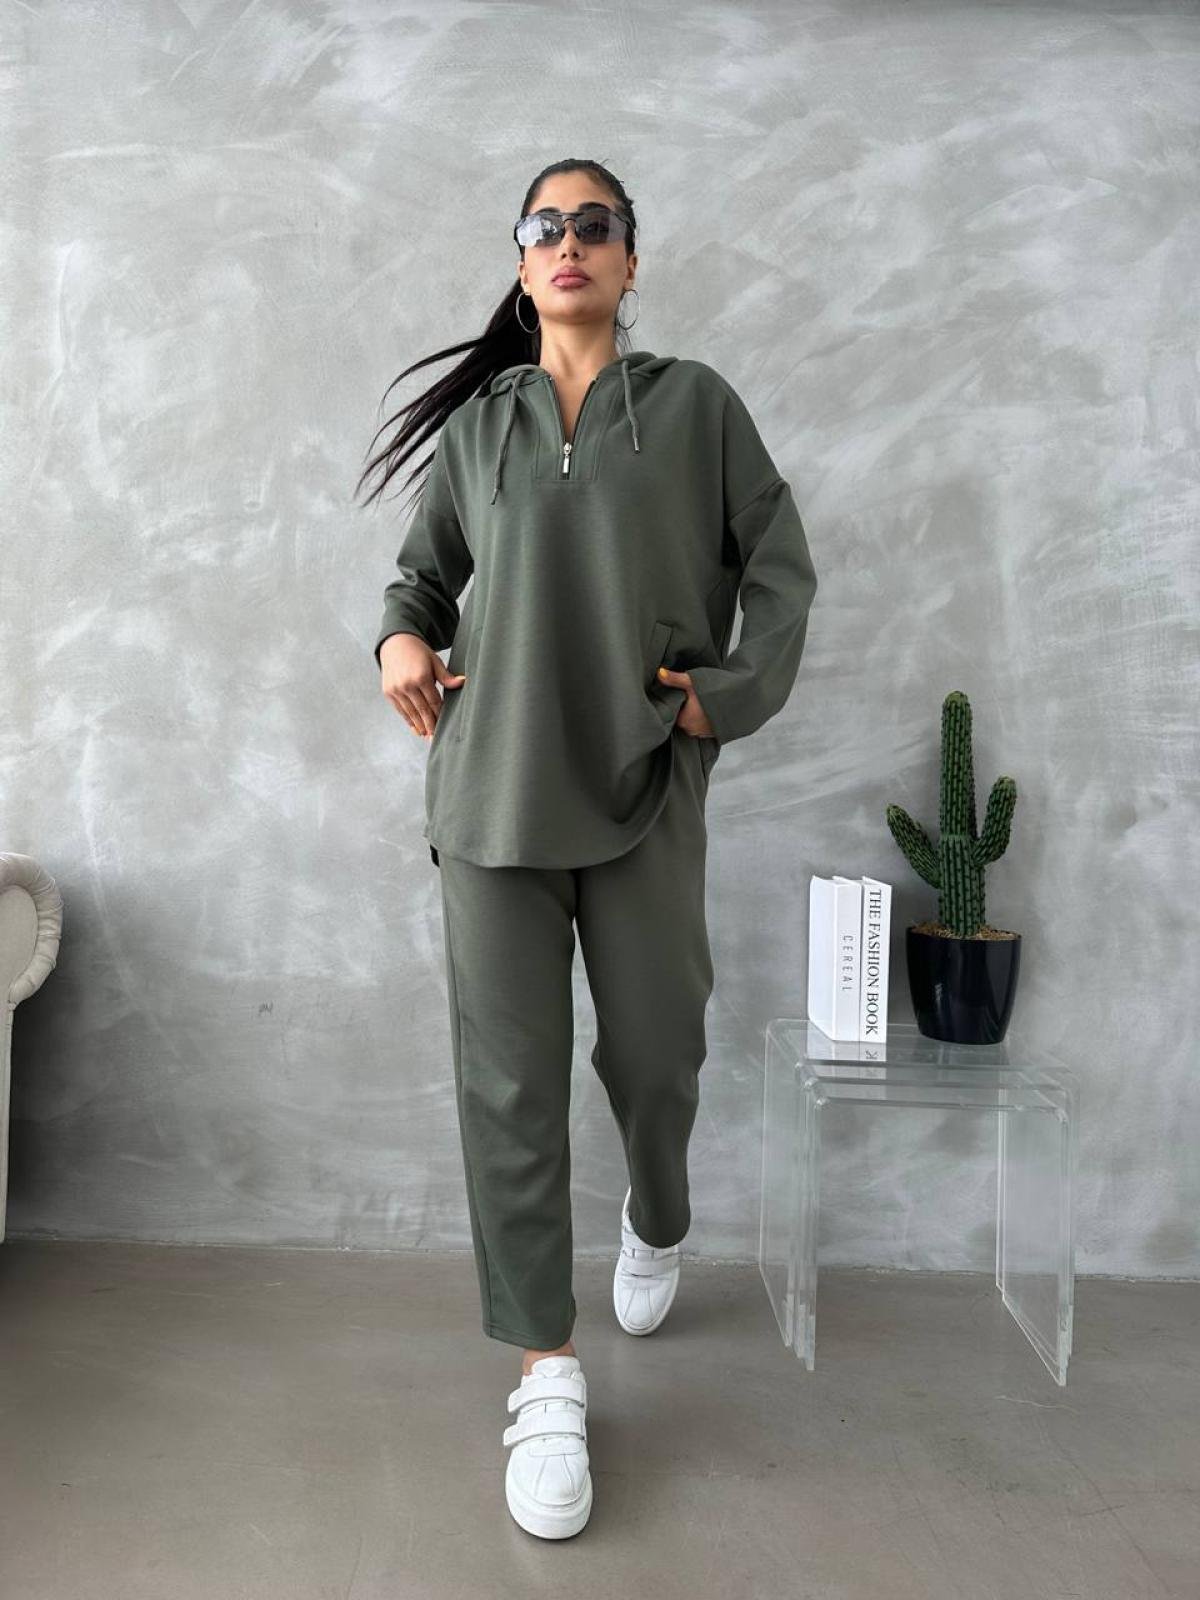 Buy Olive Solid Zipper Tracksuit for Women